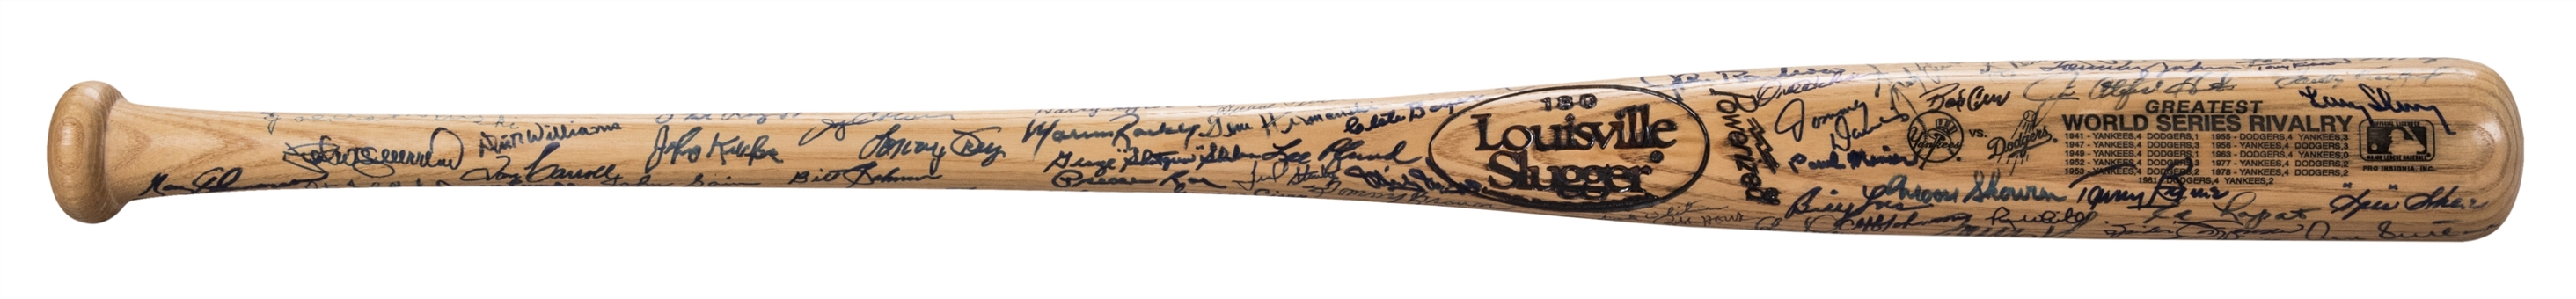 New York Yankees Vs. Dodgers "Greatest World Series Rivalry" Multi-Signed Bat with 100+ Signatures Including Berra, Koufax, Snider and Reese (JSA)